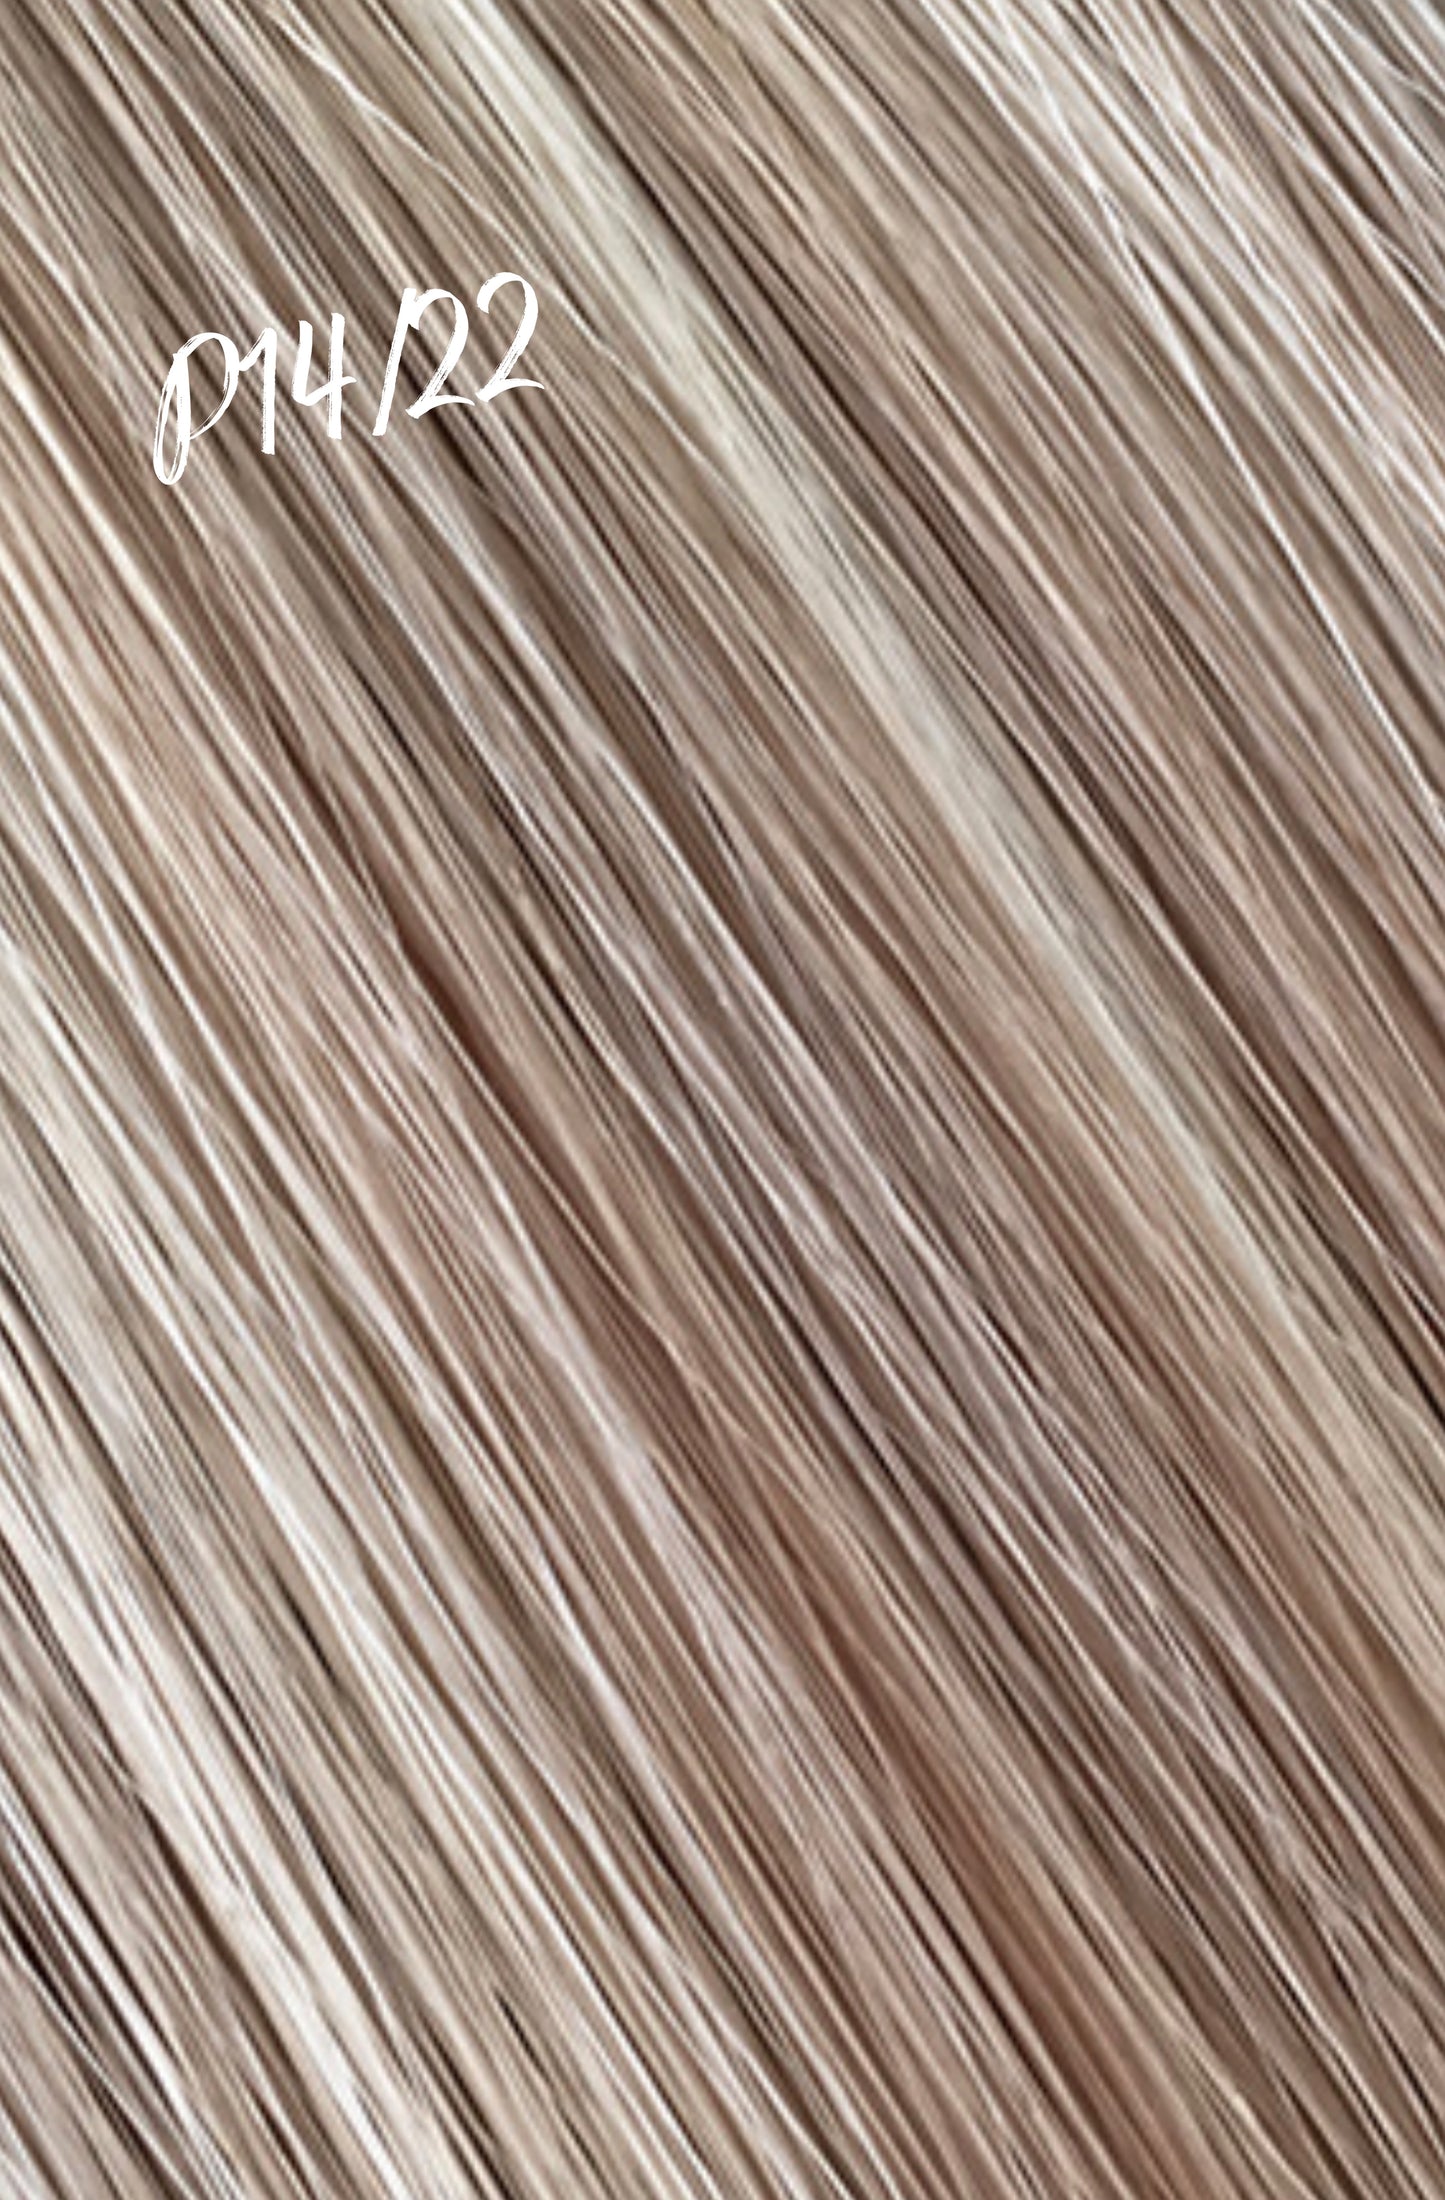 Natural Mixed Light Blonde #14/22 Hand Tied Weft Hair Extensions